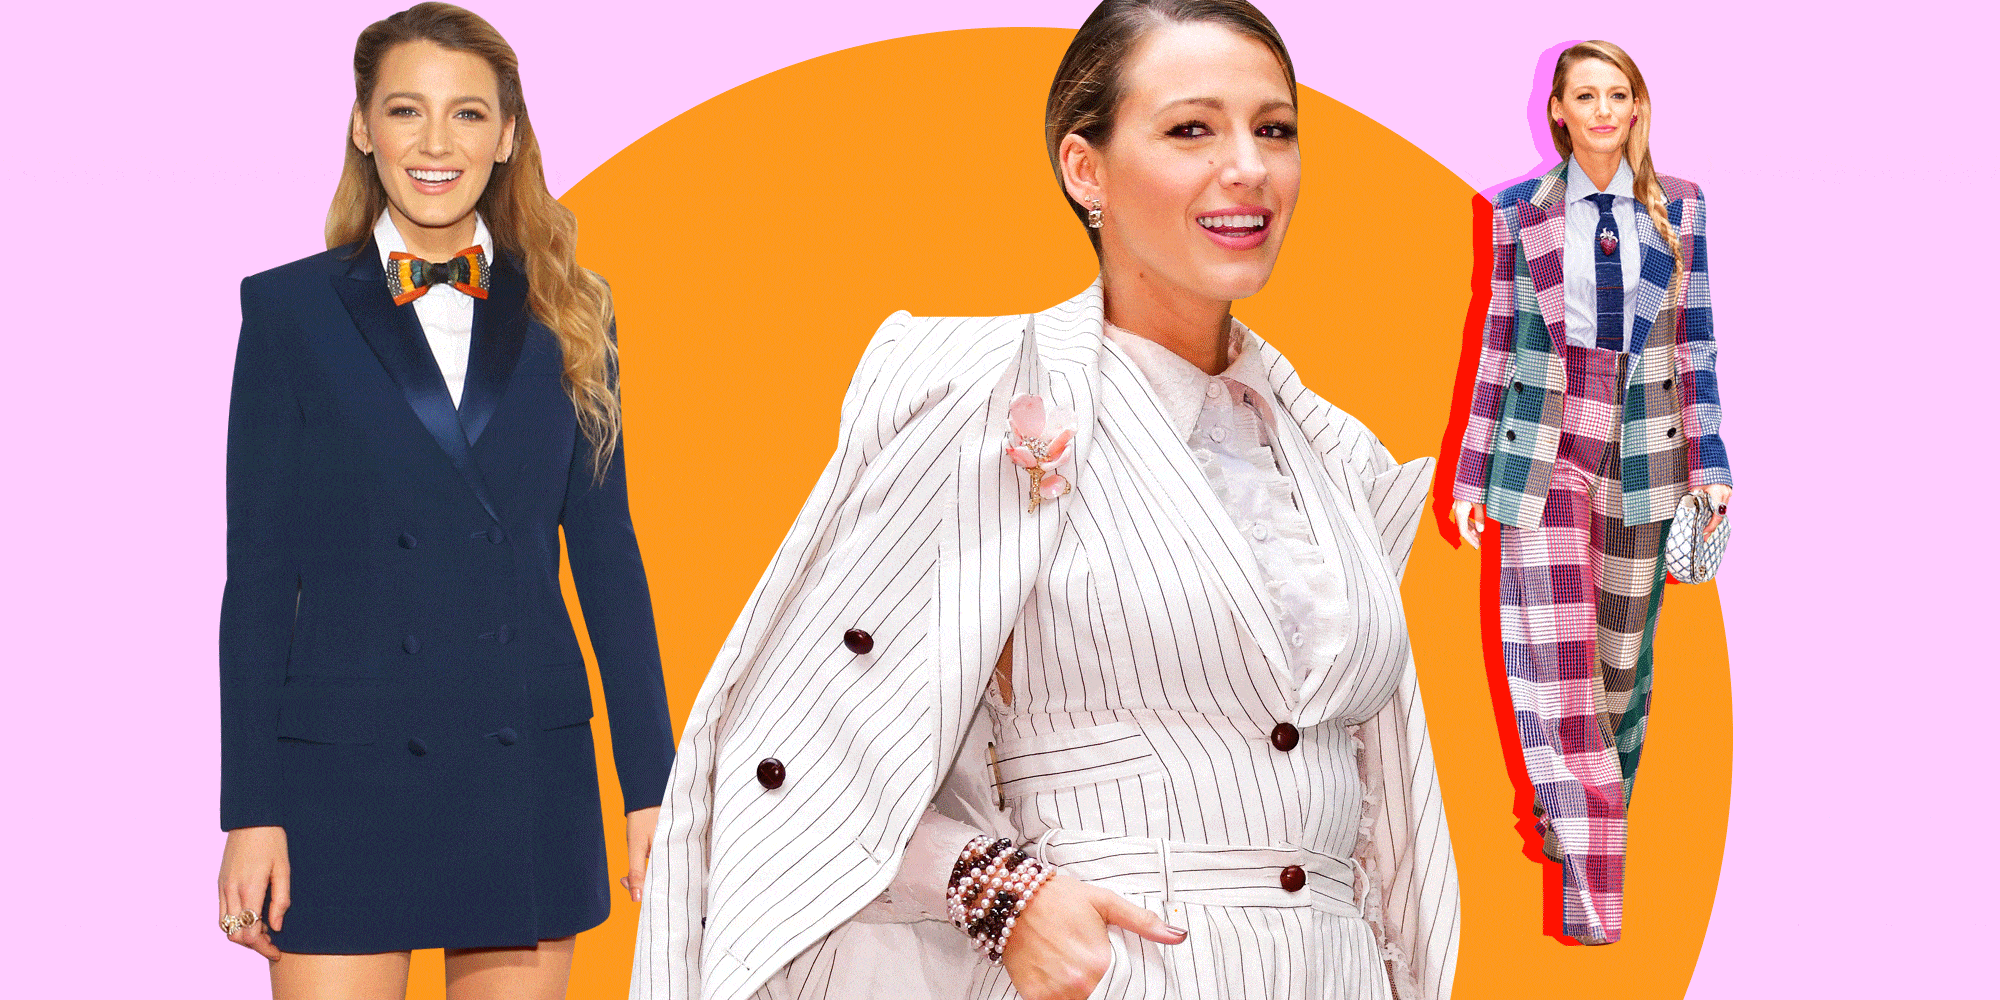 A Simple Favor' premiere: Blake Lively shares just how far she was